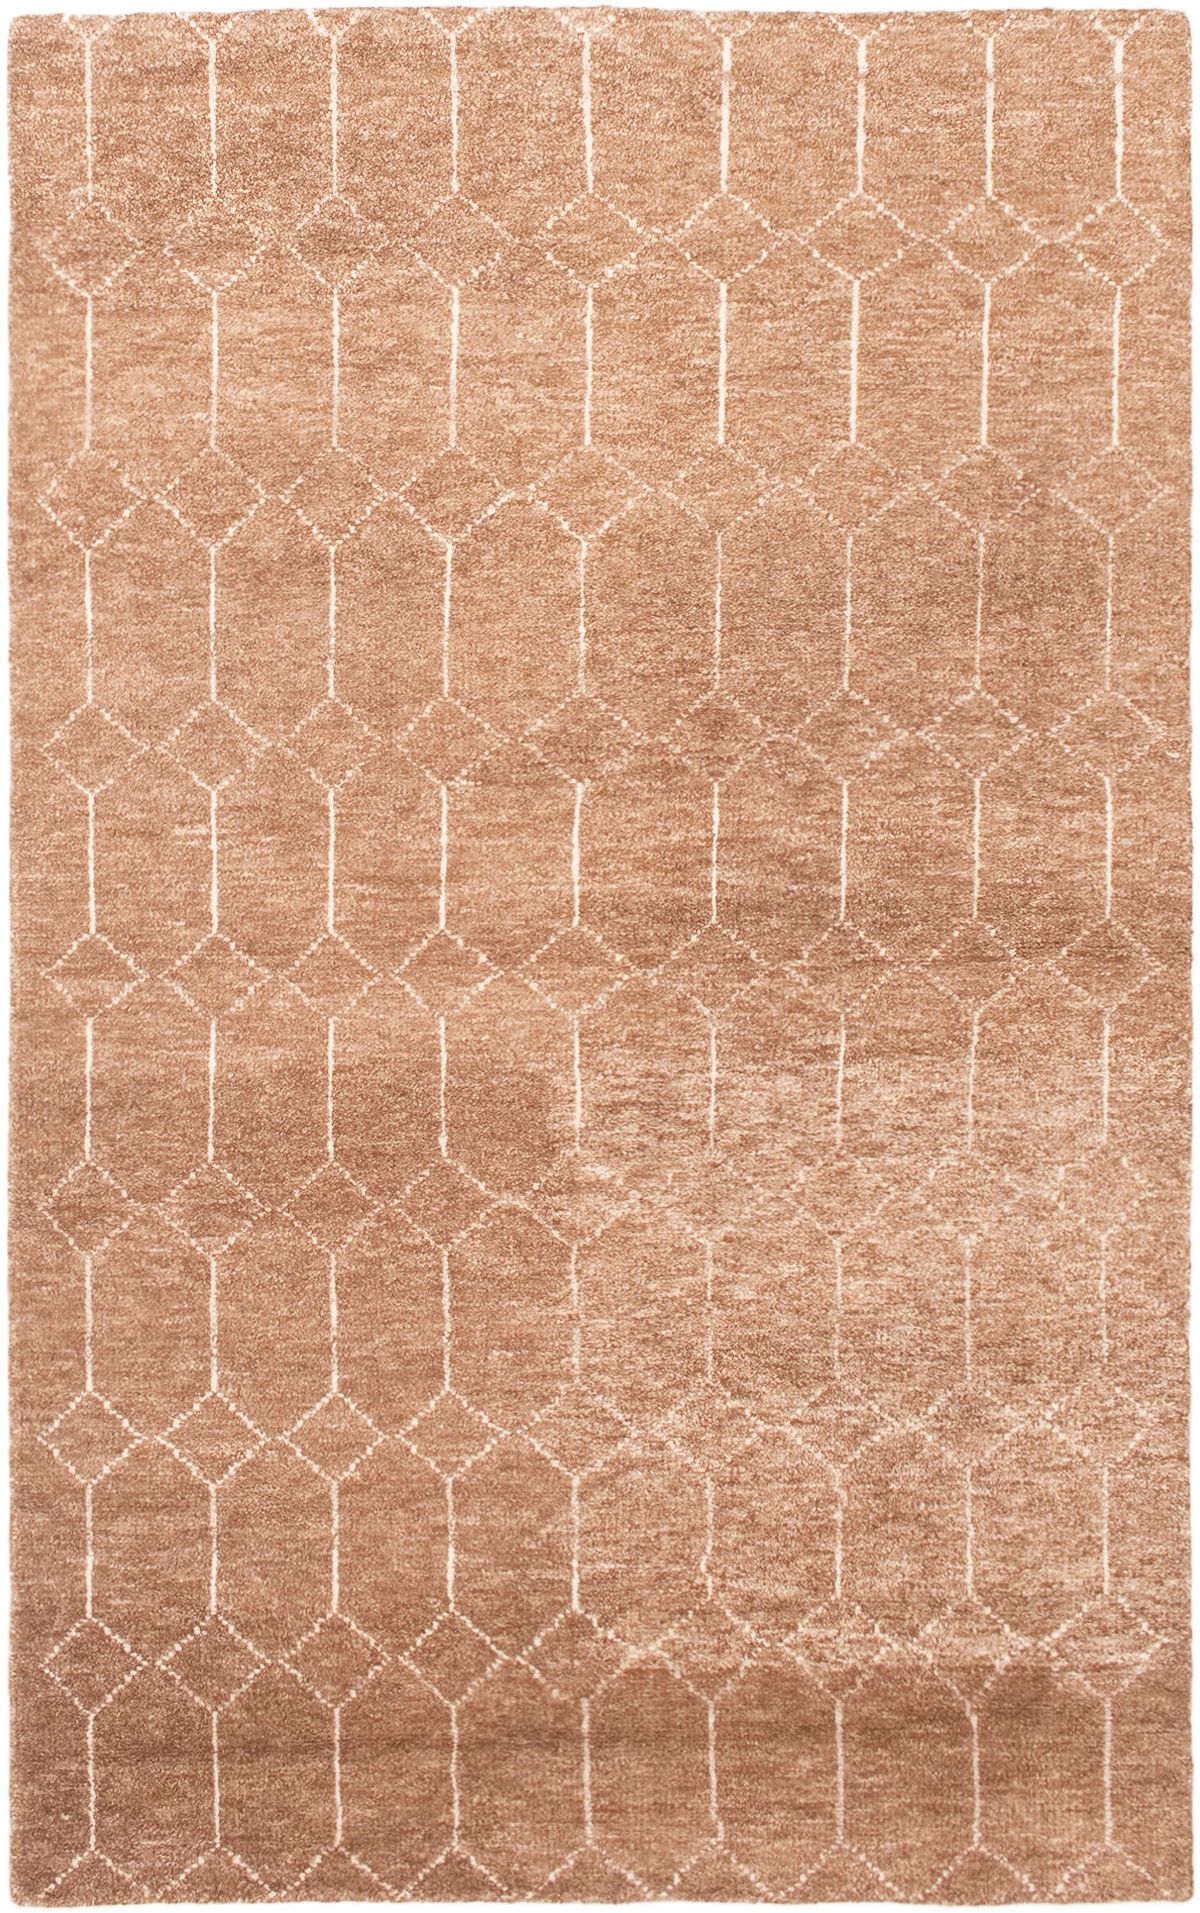 Hand-knotted Tangier Tan Wool Rug 4'11" x 8'0" Size: 4'11" x 8'0"  